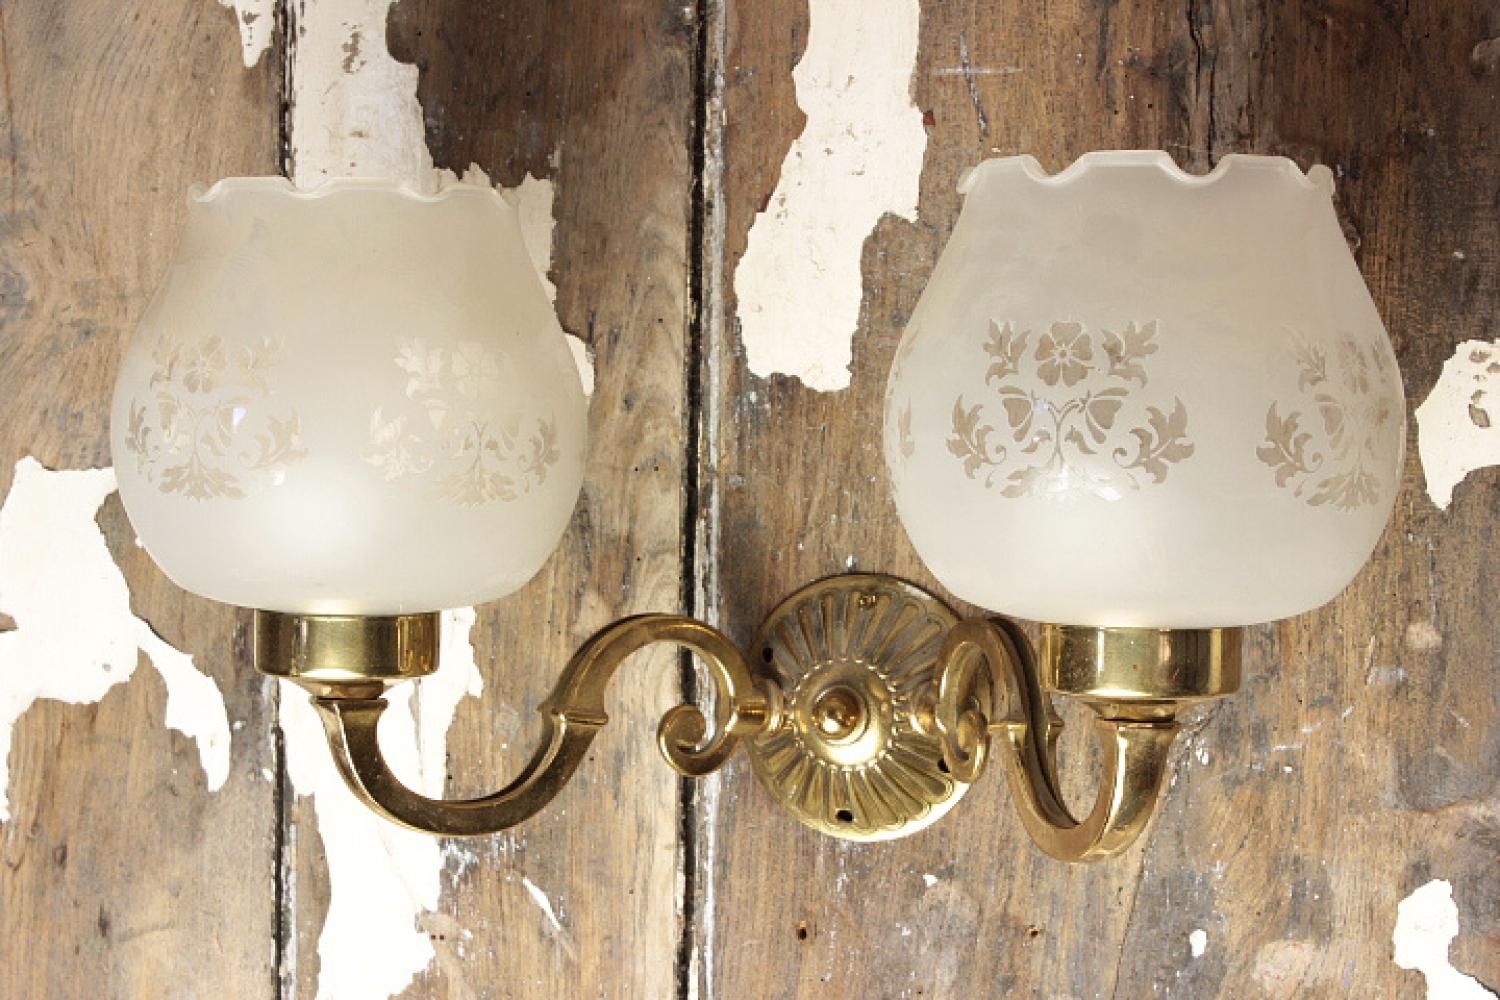 Delightful etched bowl brass lamps with a classic styled cone mount and scroll arms. Shades fixed by threaded collar with floral design and shaped rims. Available stock, 3 doubles with glass shades These 3 sold / 3 doubles without glass shades / 2